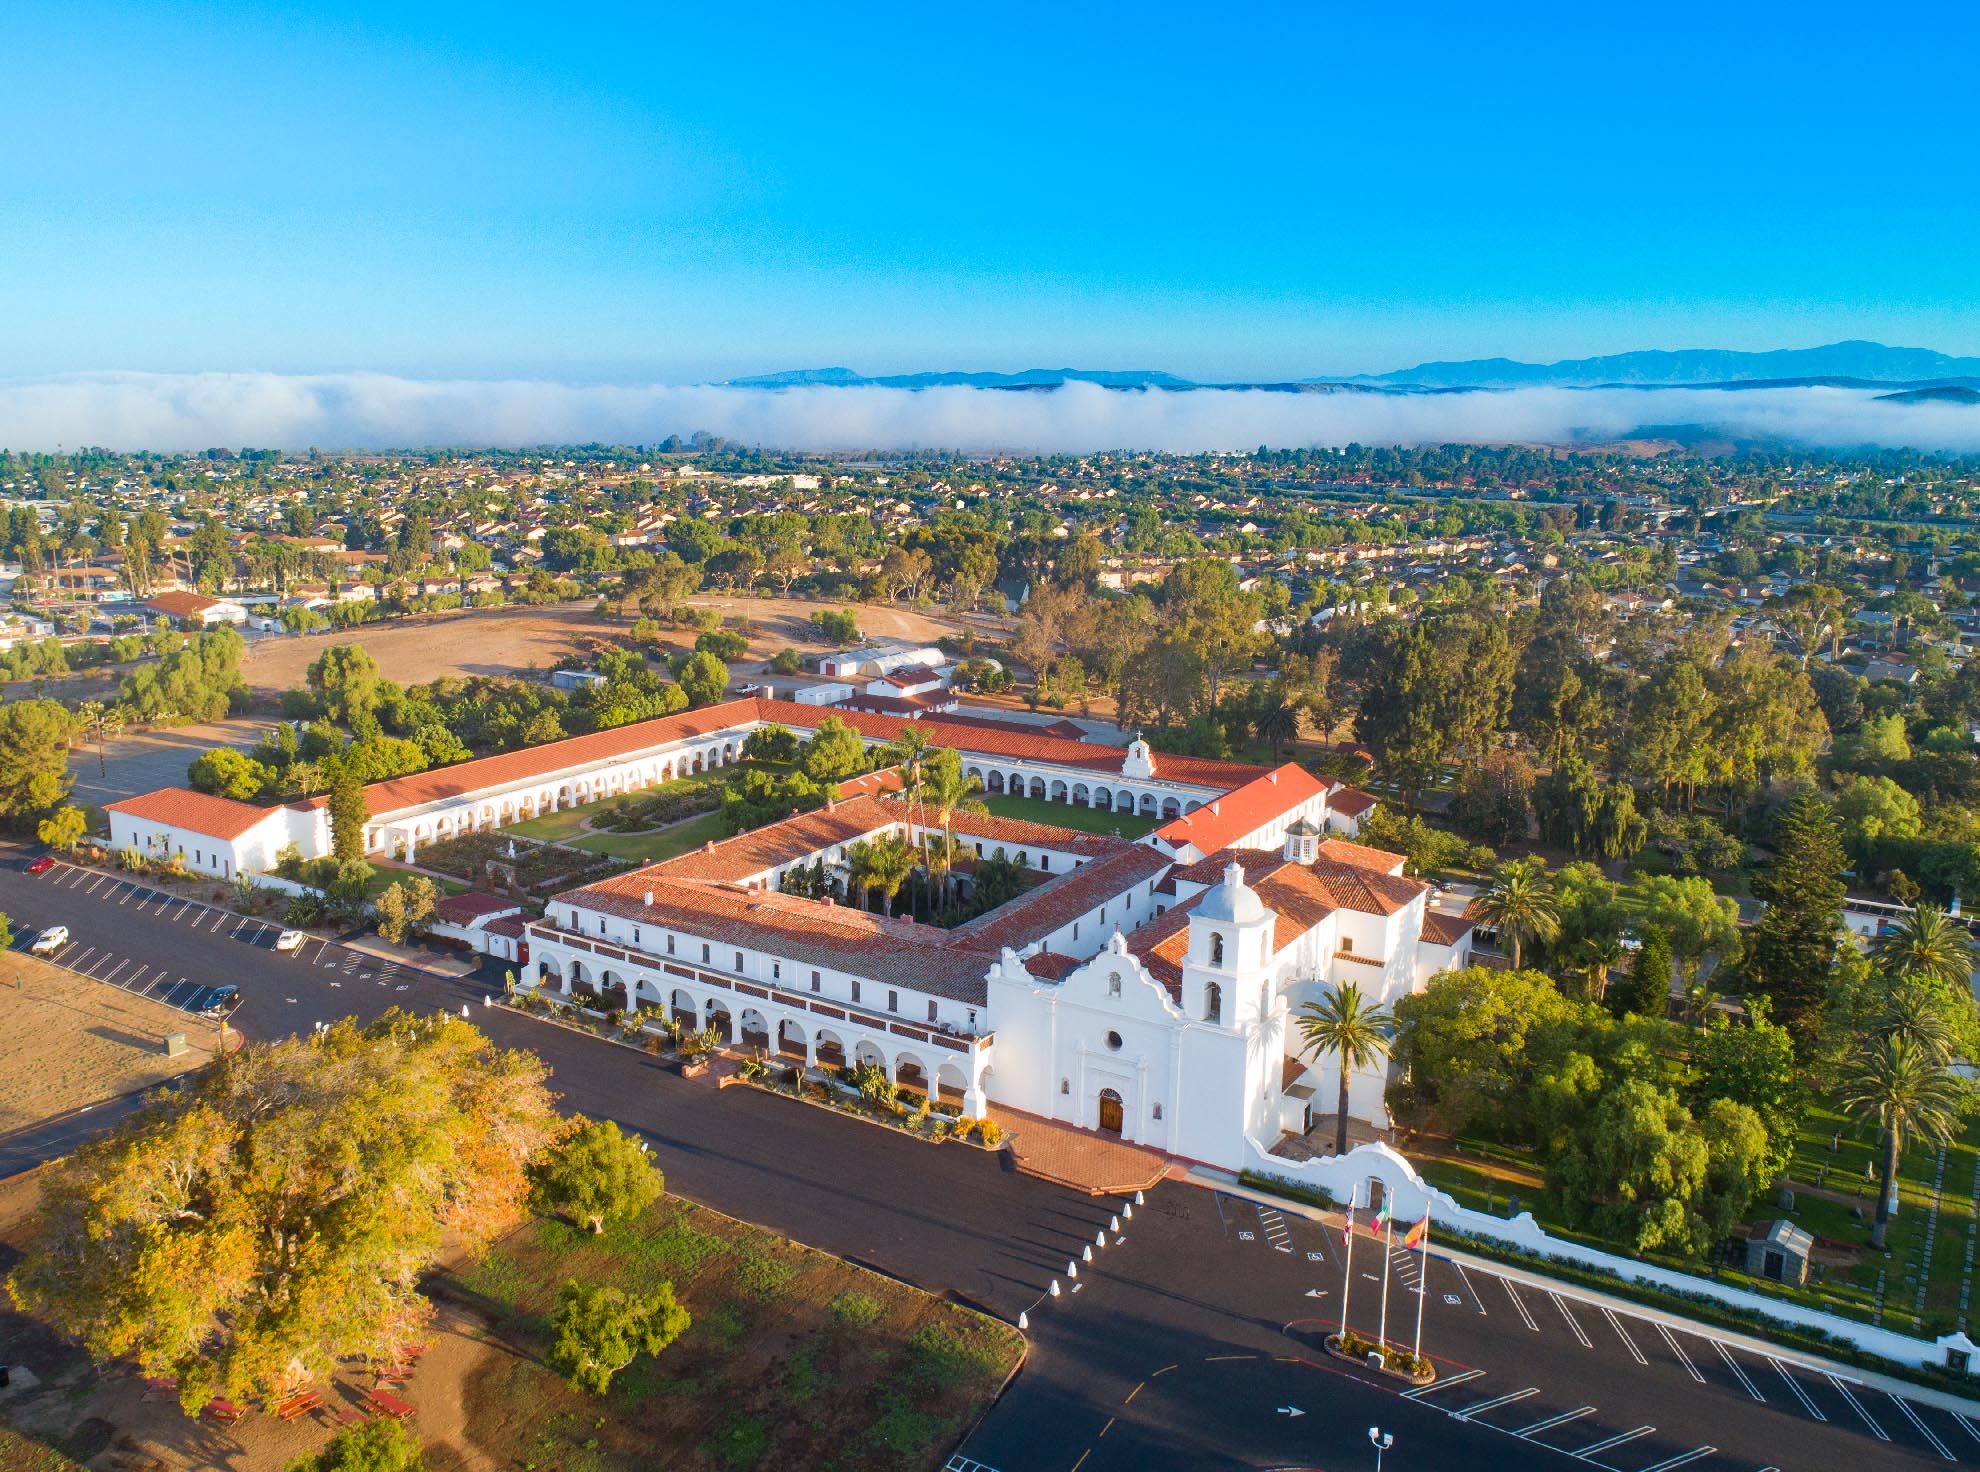 Drone Photograph of St Luis Rey Mission Oceanside California